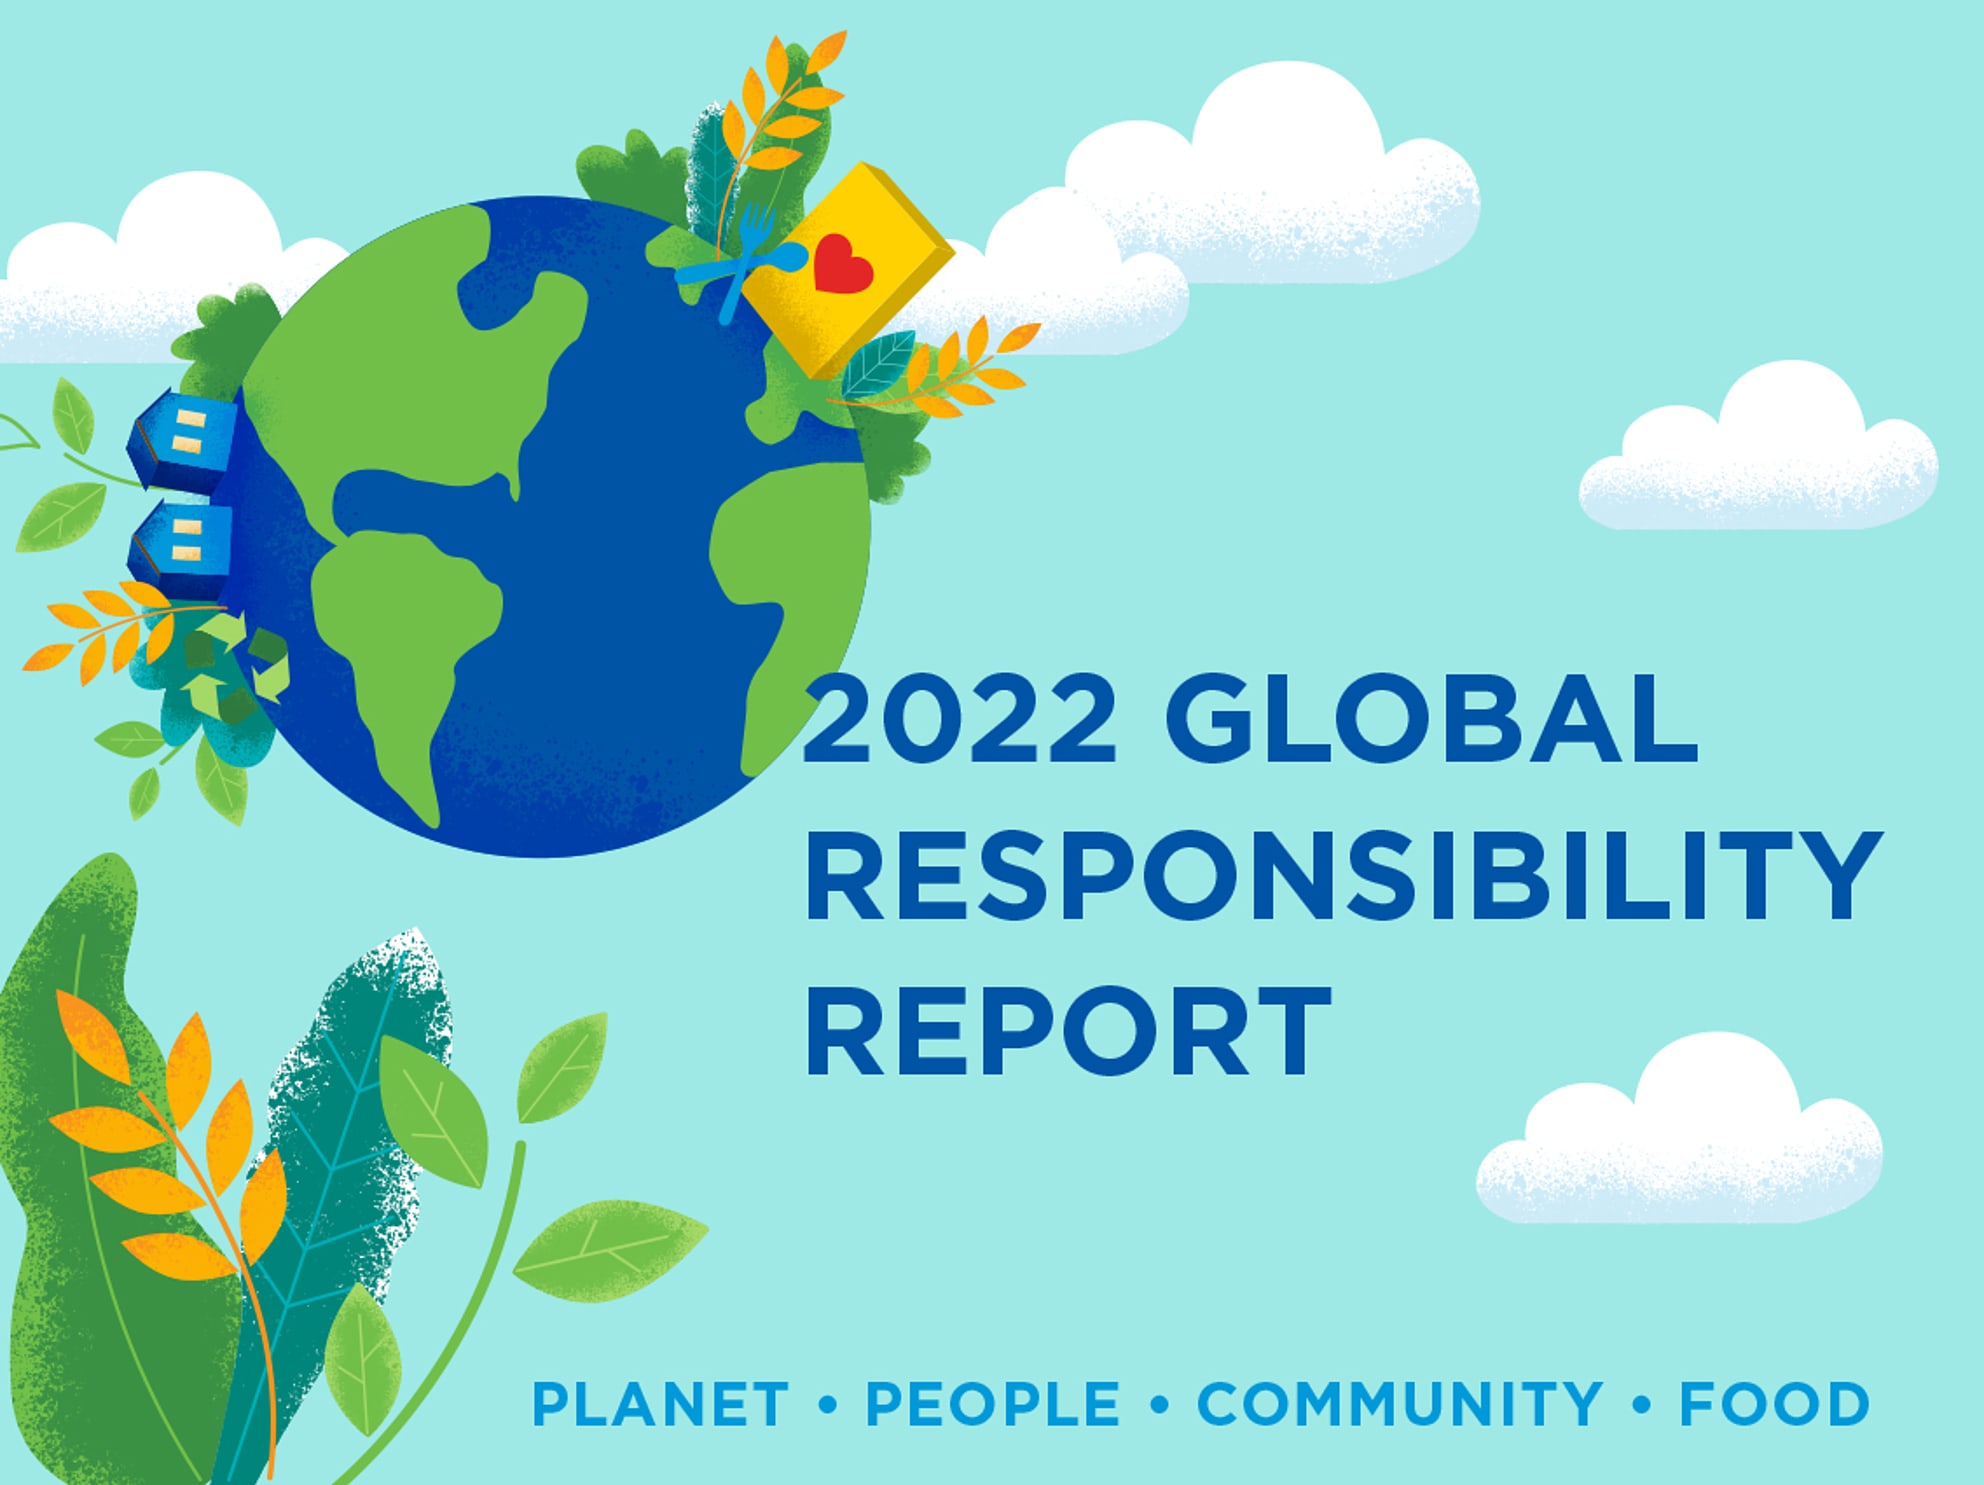 2022 Global Responsibility Report with animated Earth